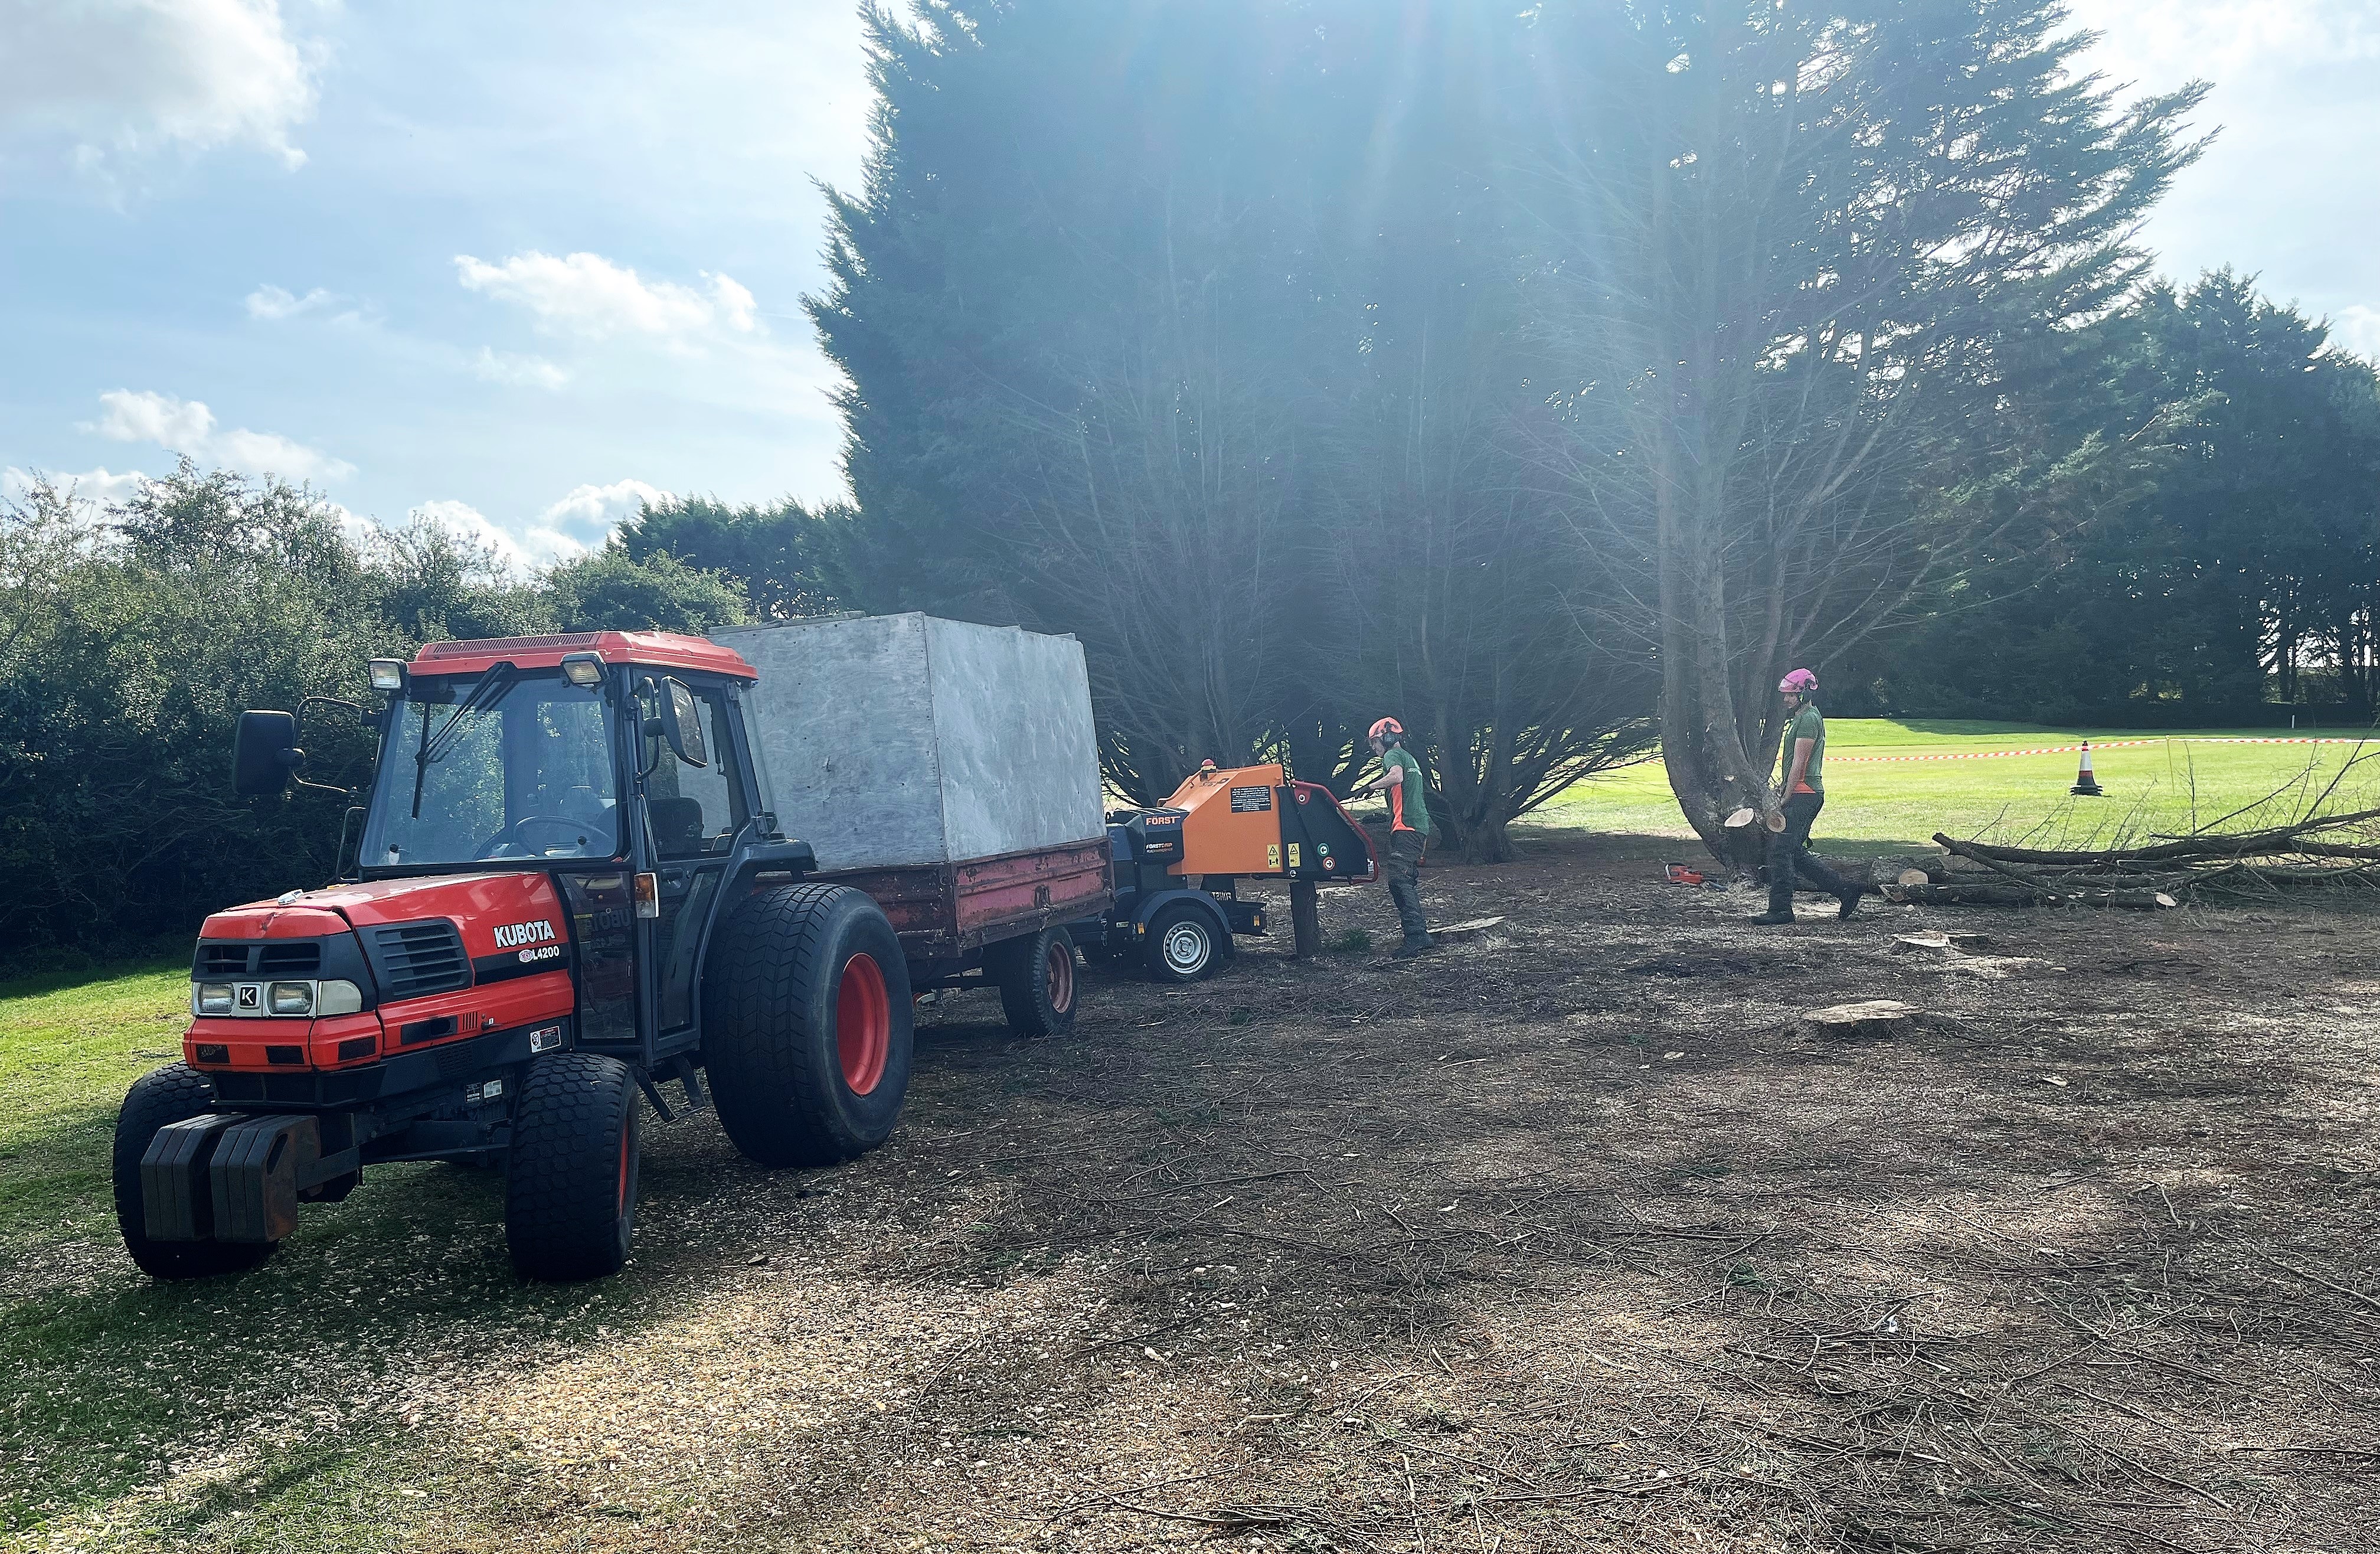 Dorset Treeworx Ltd | Commercial tree maintenance clearance by professional tree surgeons in Weymouth, Portland, Dorchester, South Dorset  - tree care service, tree removal service, hedge trimming service, hedge removal service, stump grinding service